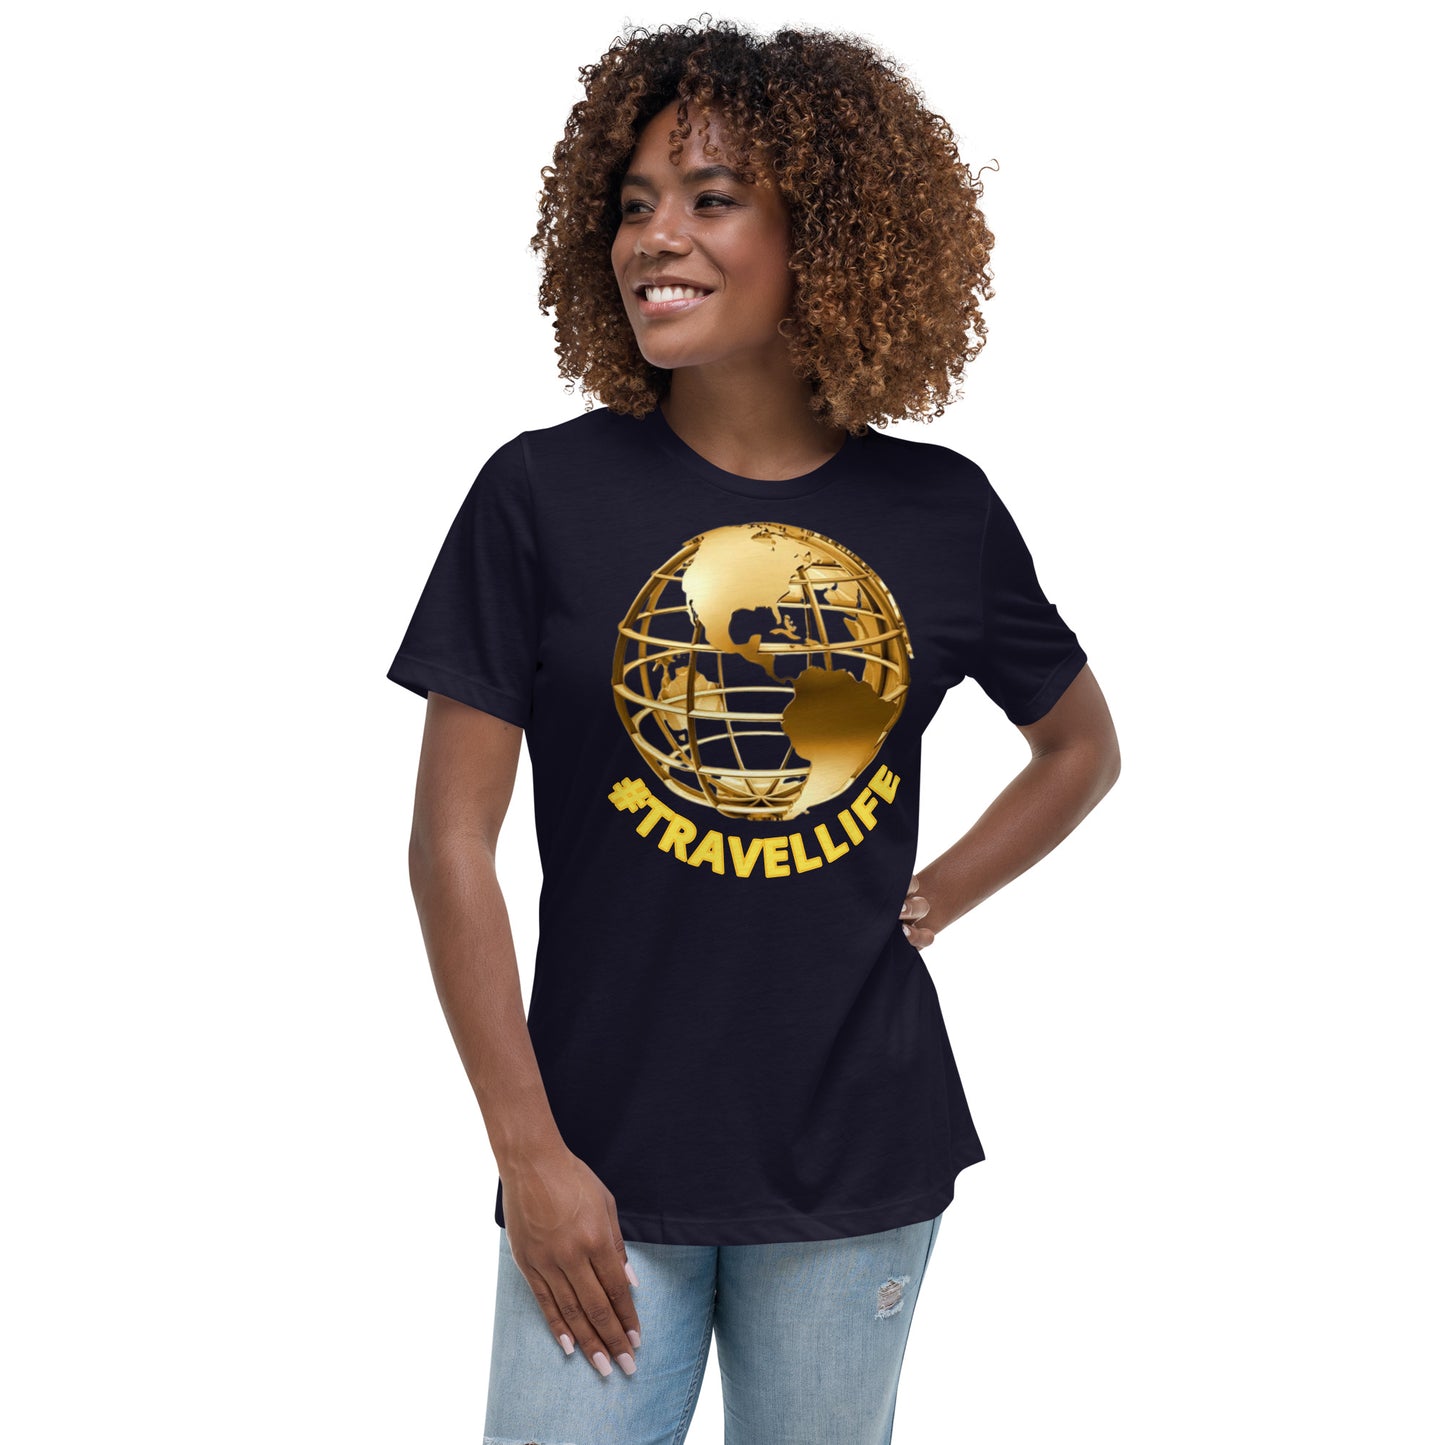 #Travellife World Women's Black Relaxed T-Shirt Large Gold Text